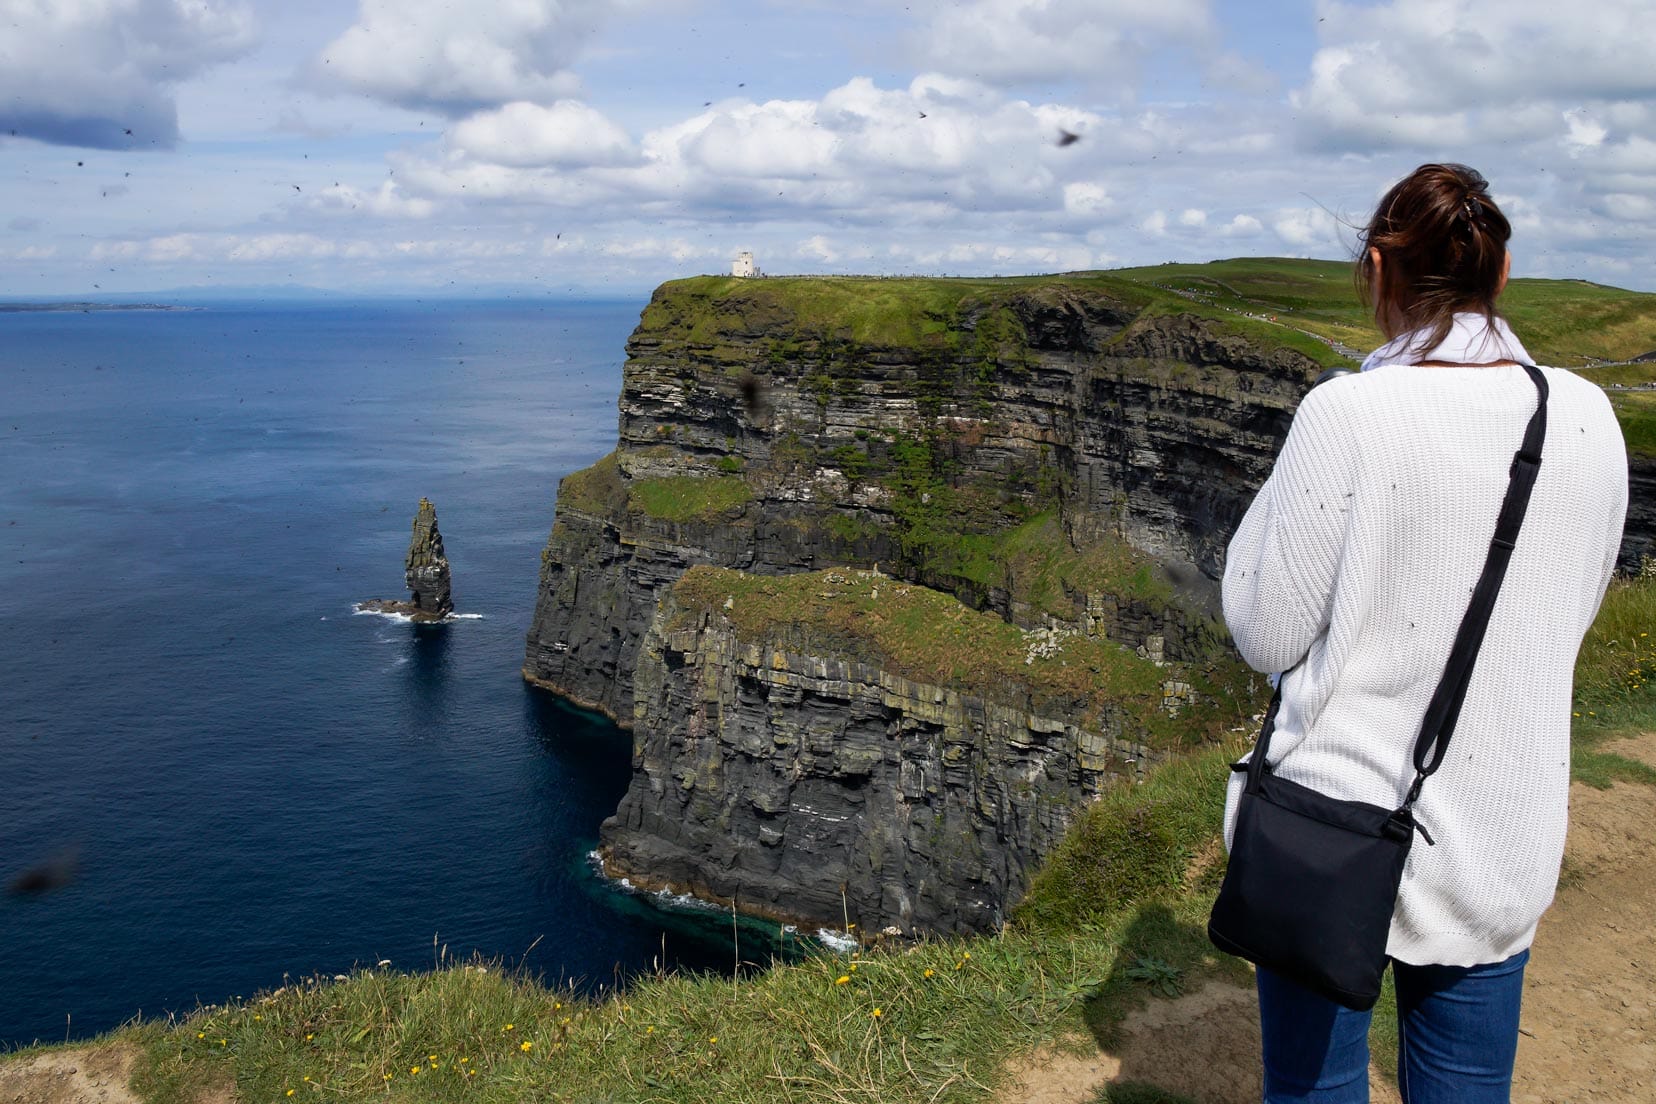 Shelley at the Cliffs of Moher with lots of flies on her white jumper and flying around